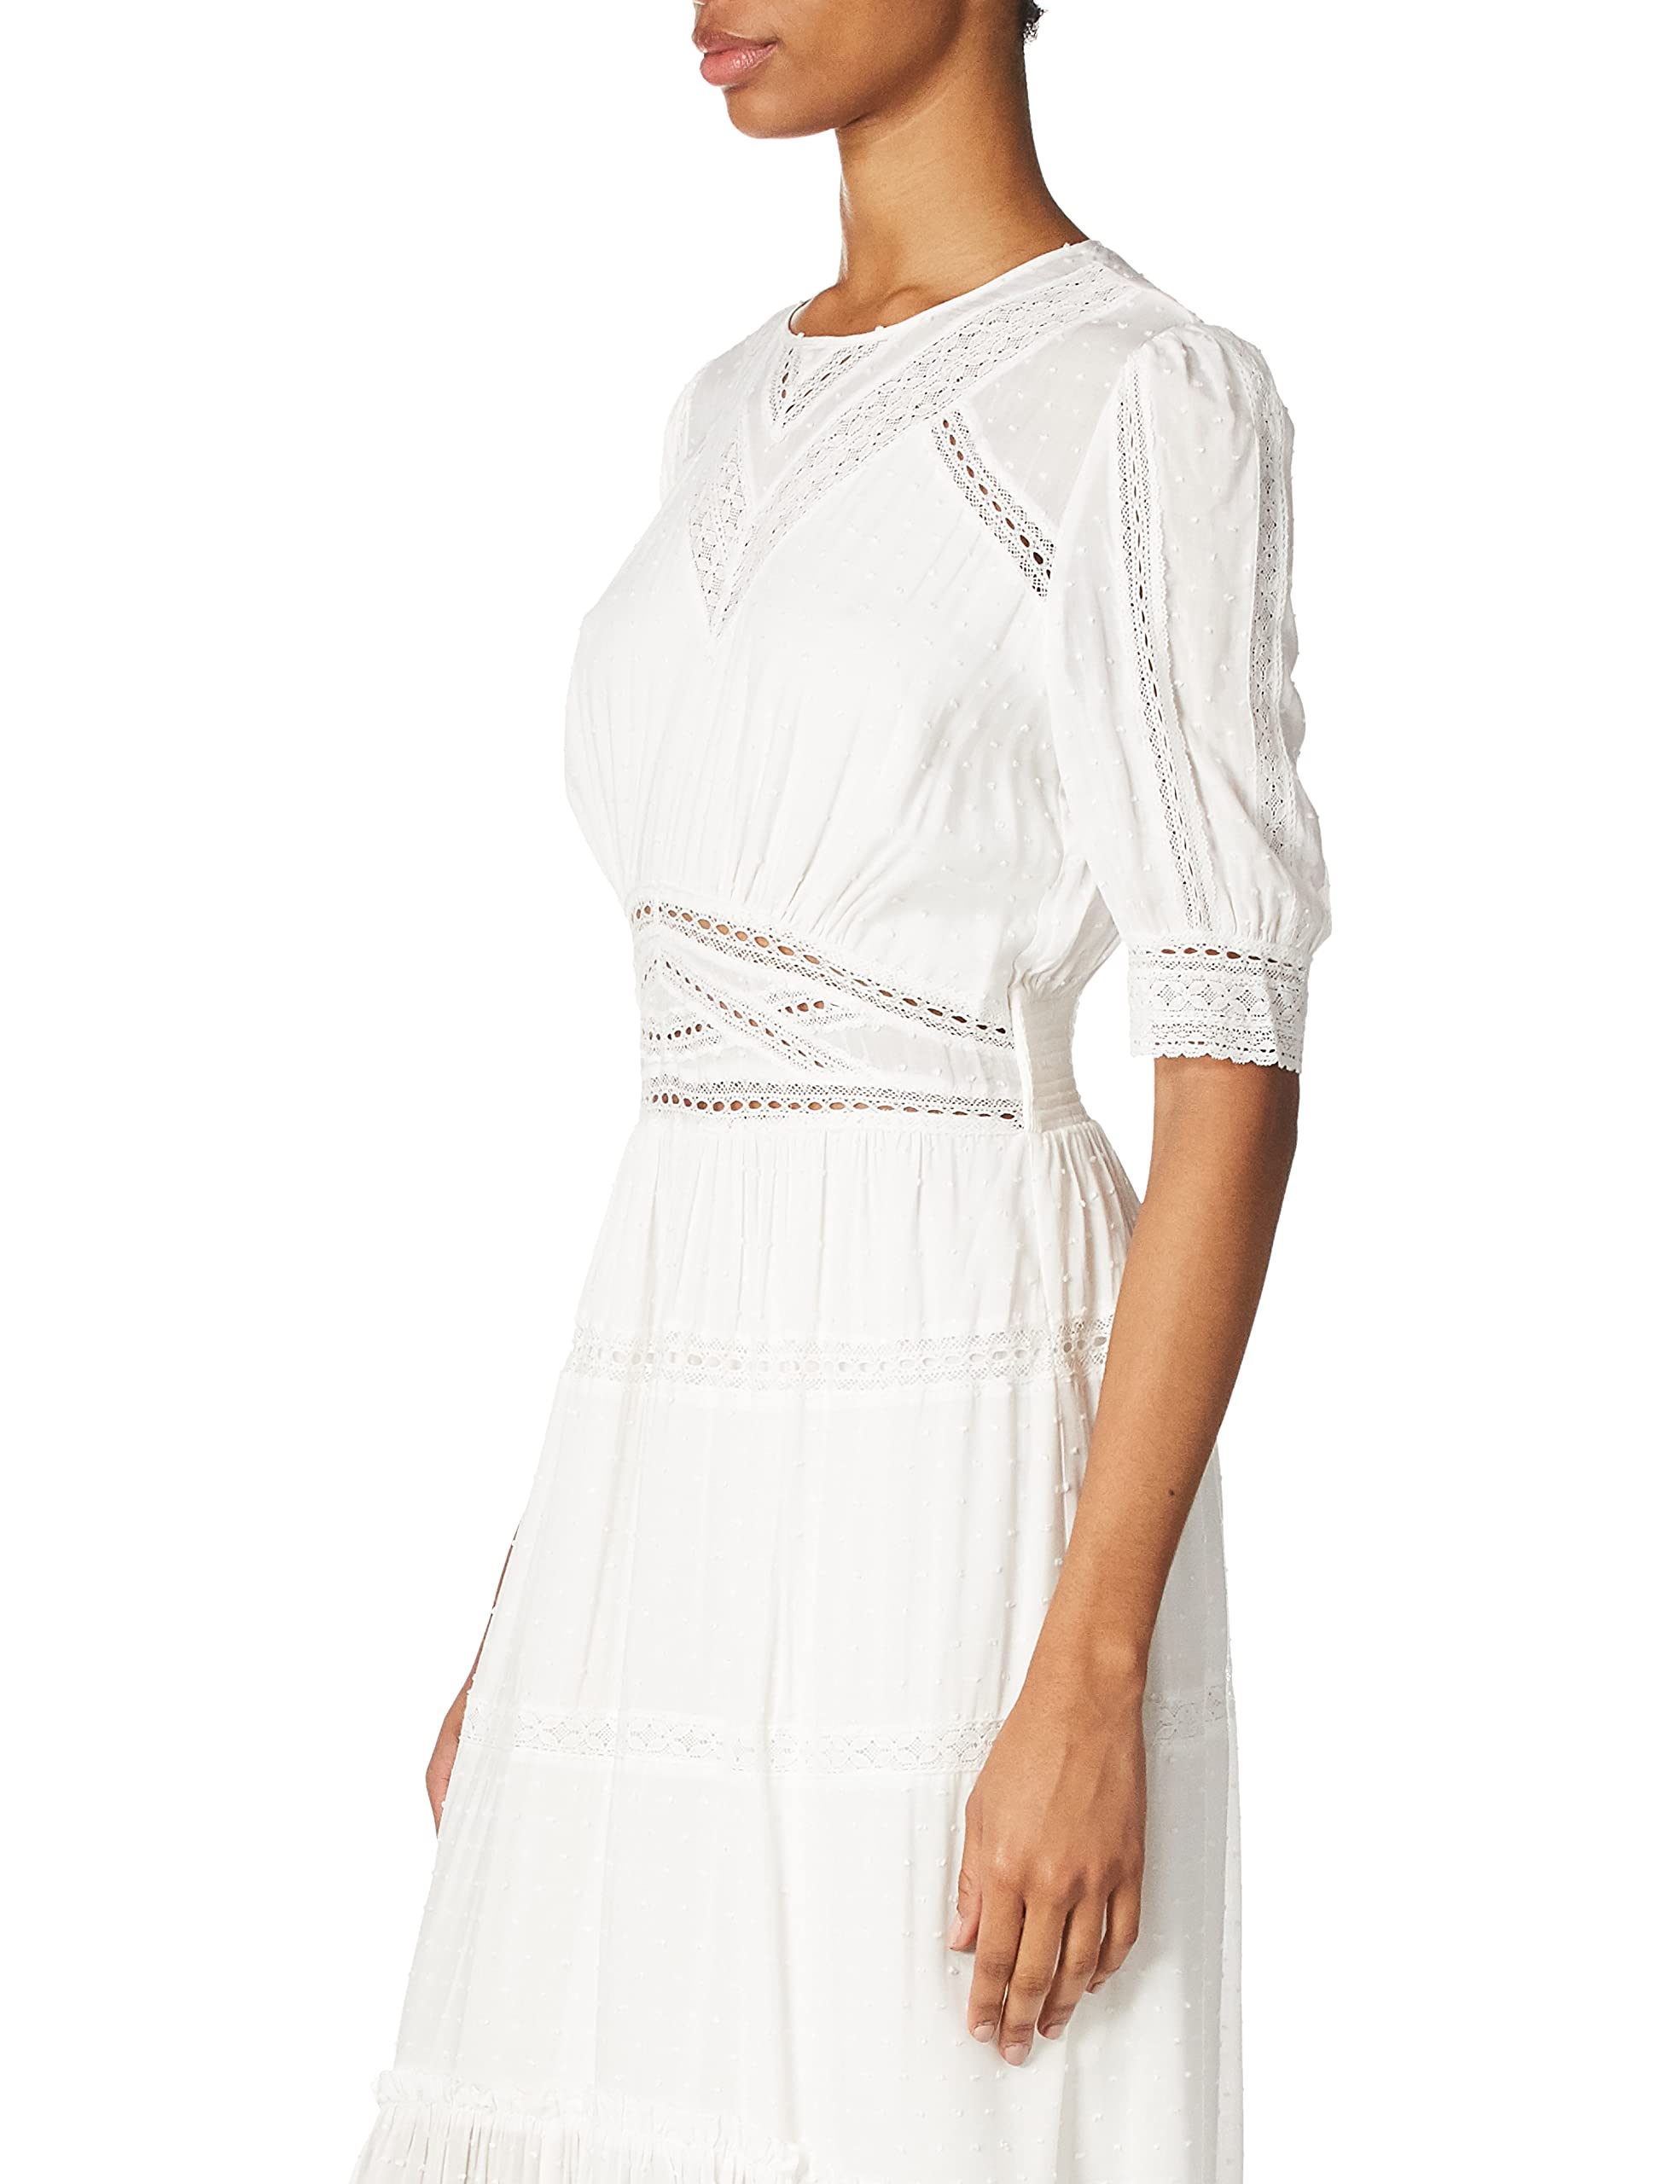 The Kooples Women's Long Dress with Mid-Length Sleeves